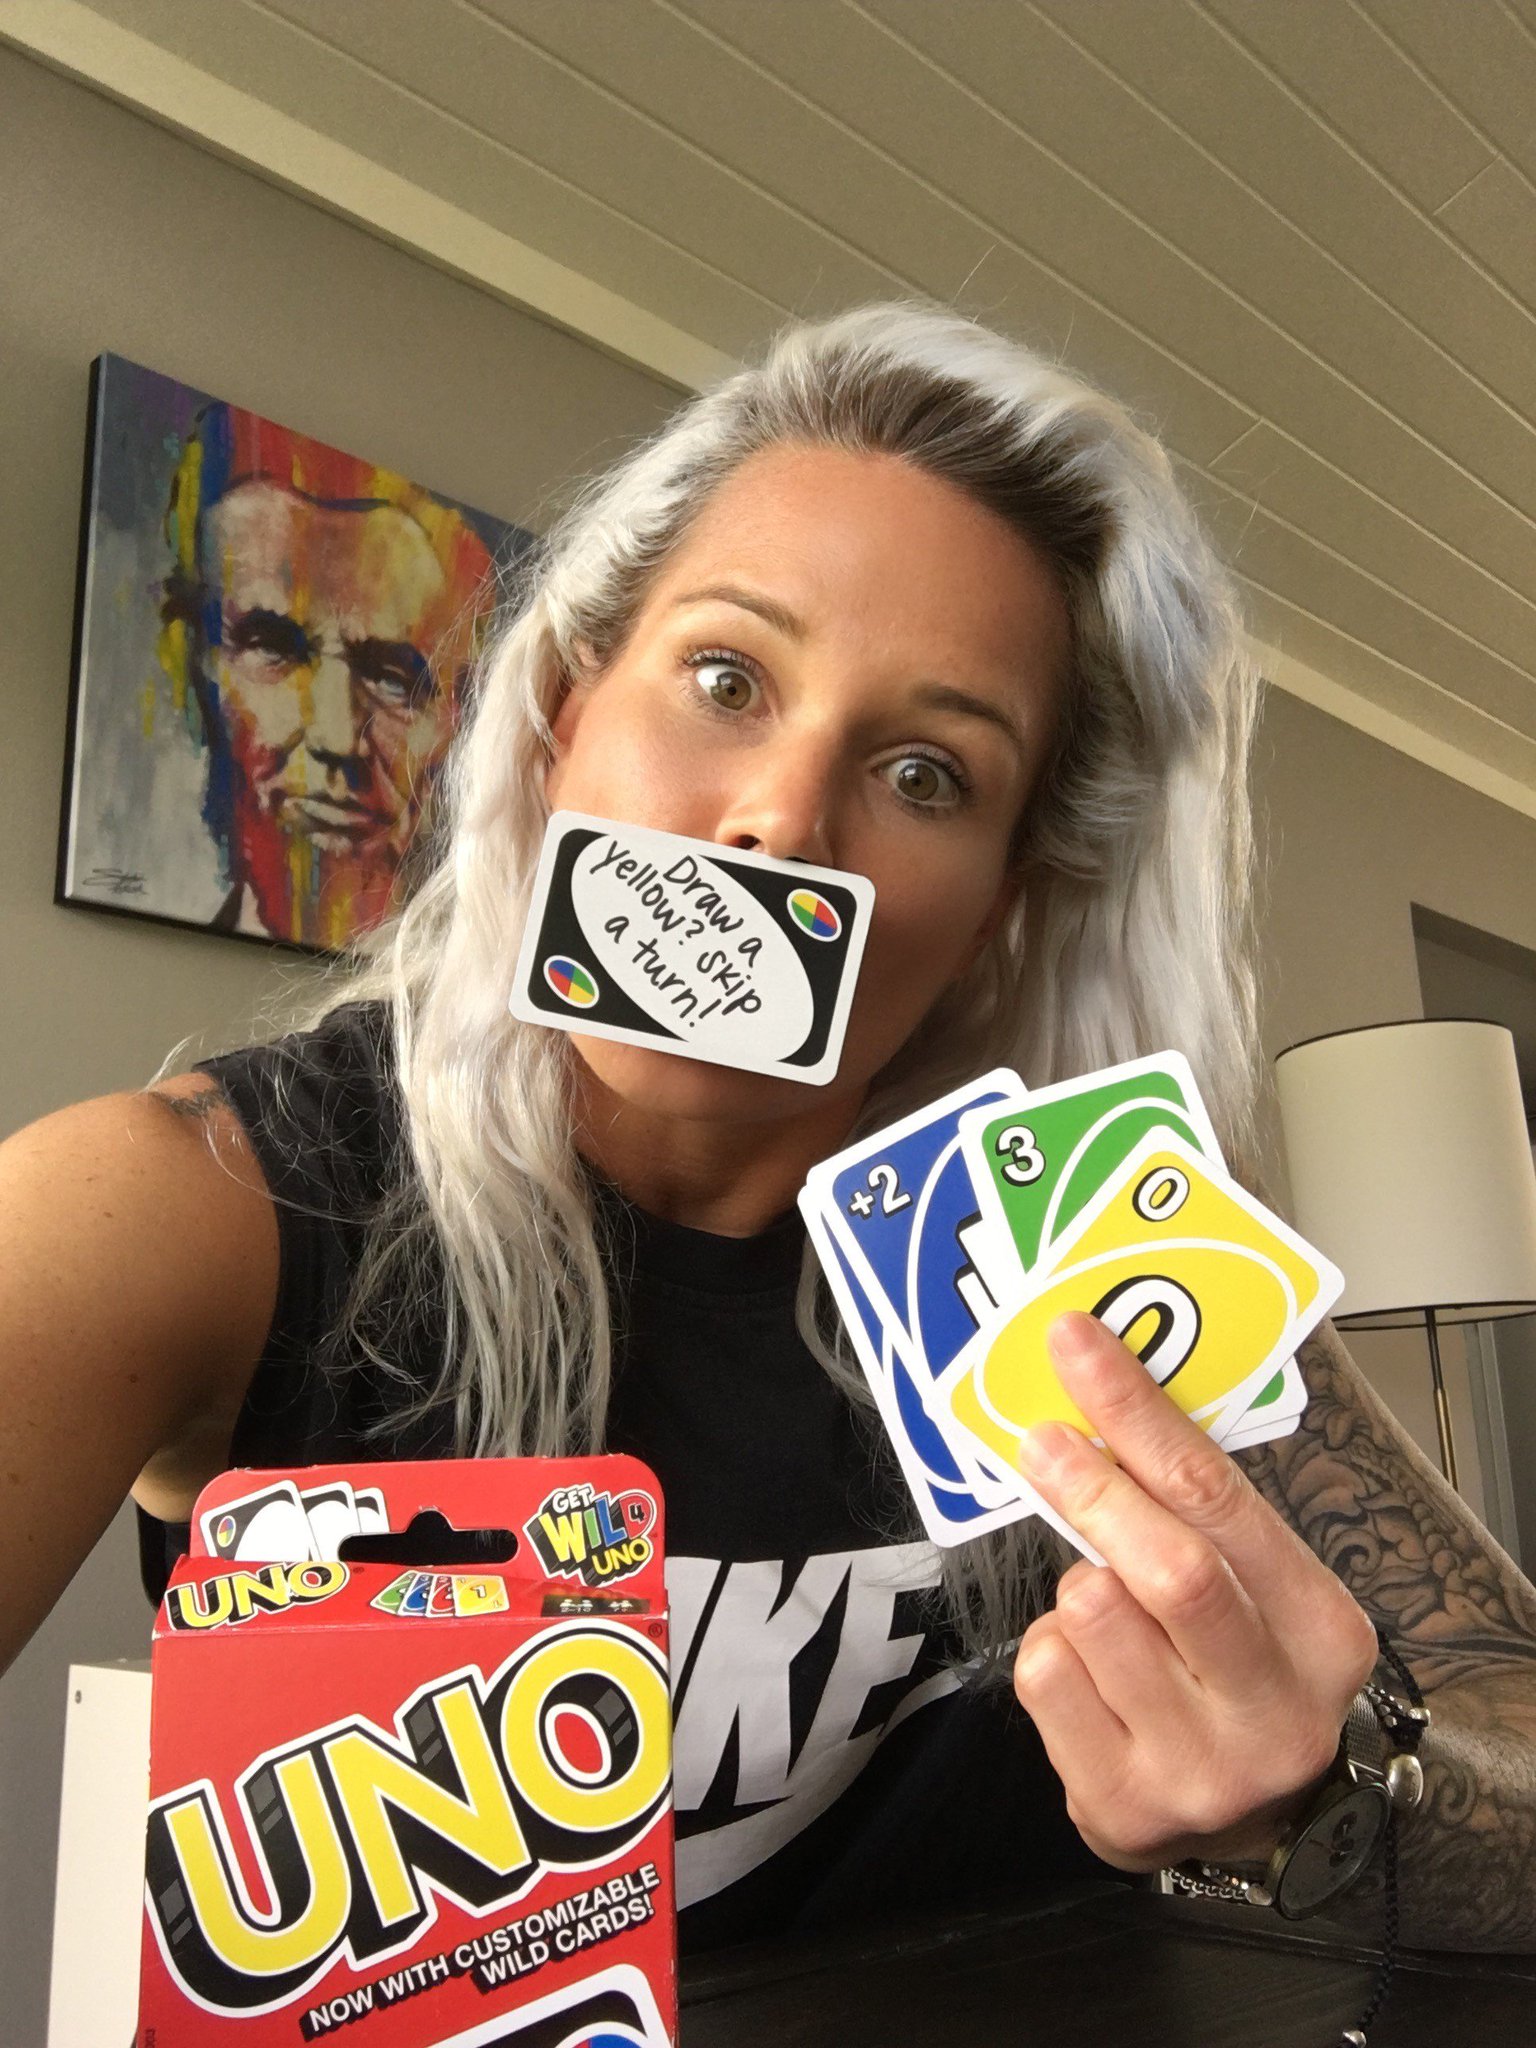 Ashlyn Harris On Twitter Draw A Yellow Skip A Turn What S Your Wild Uno Rule Enter To Win Prizes Https T Co Lfikgrdnyi Wild4uno Ad